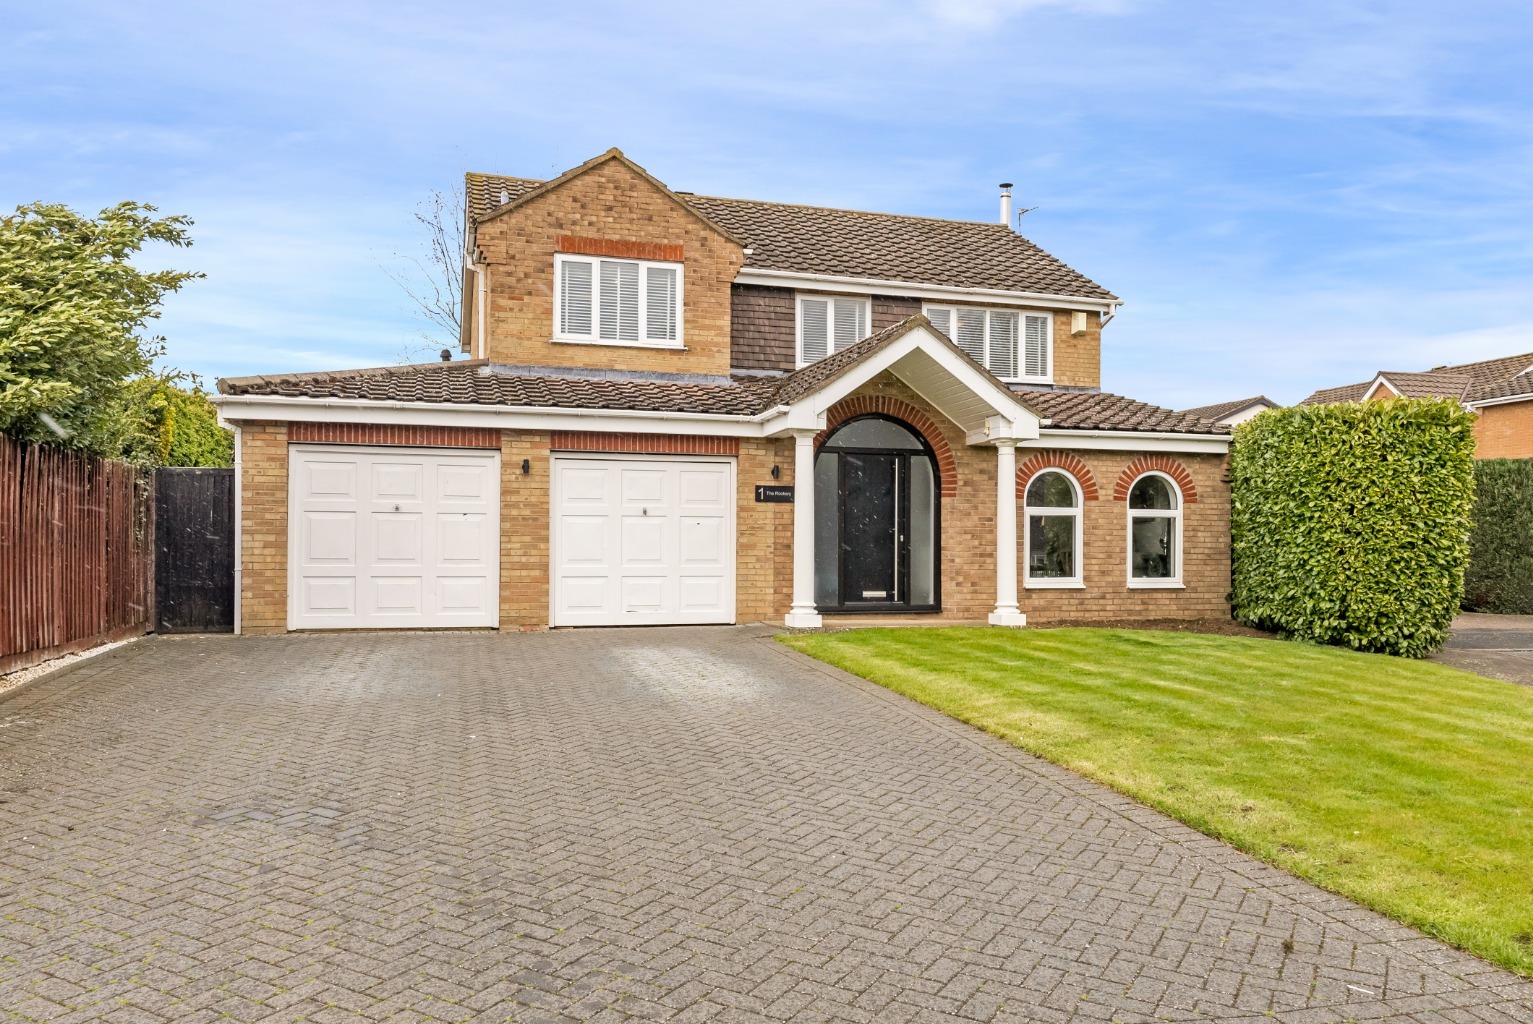 5 bed detached house for sale in The Rookery, St Neots  - Property Image 1